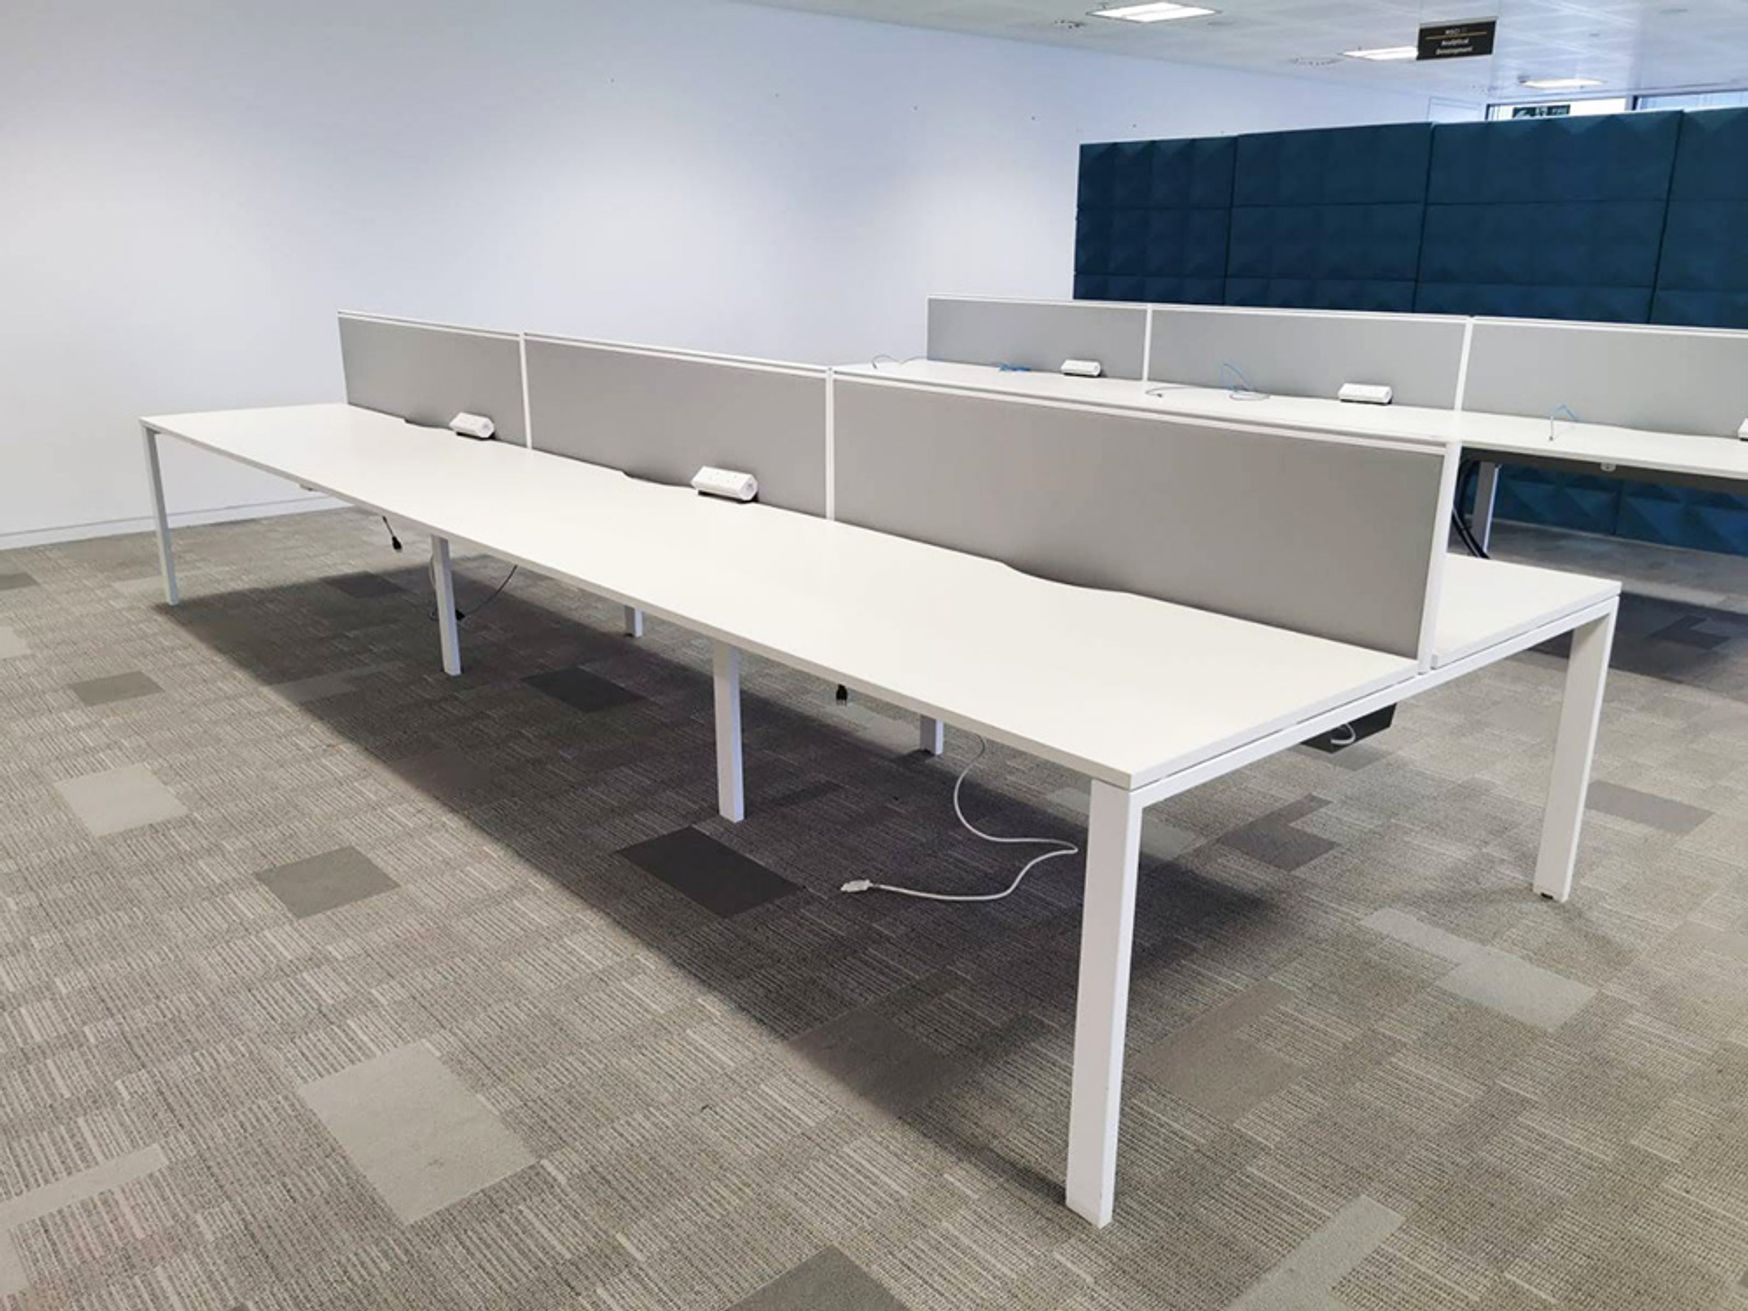 Used 1600mm White Bench Desks with Screens